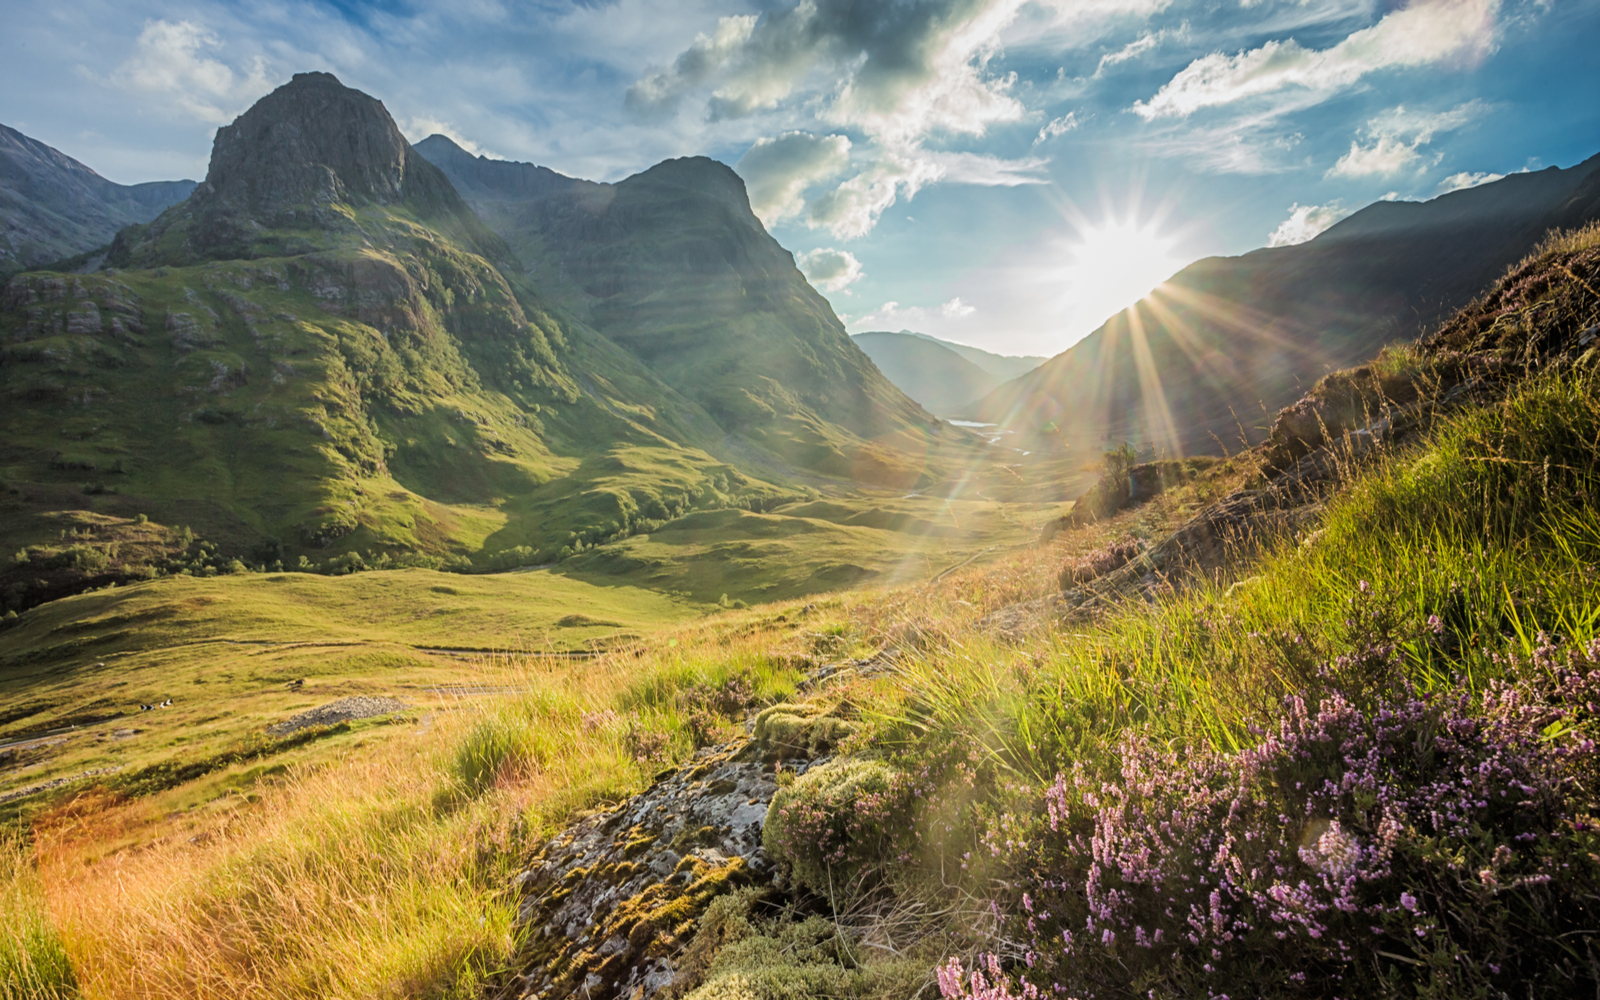 Valley view of the mountains of Glencoe Lochaber during the overall best time to visit Scotland